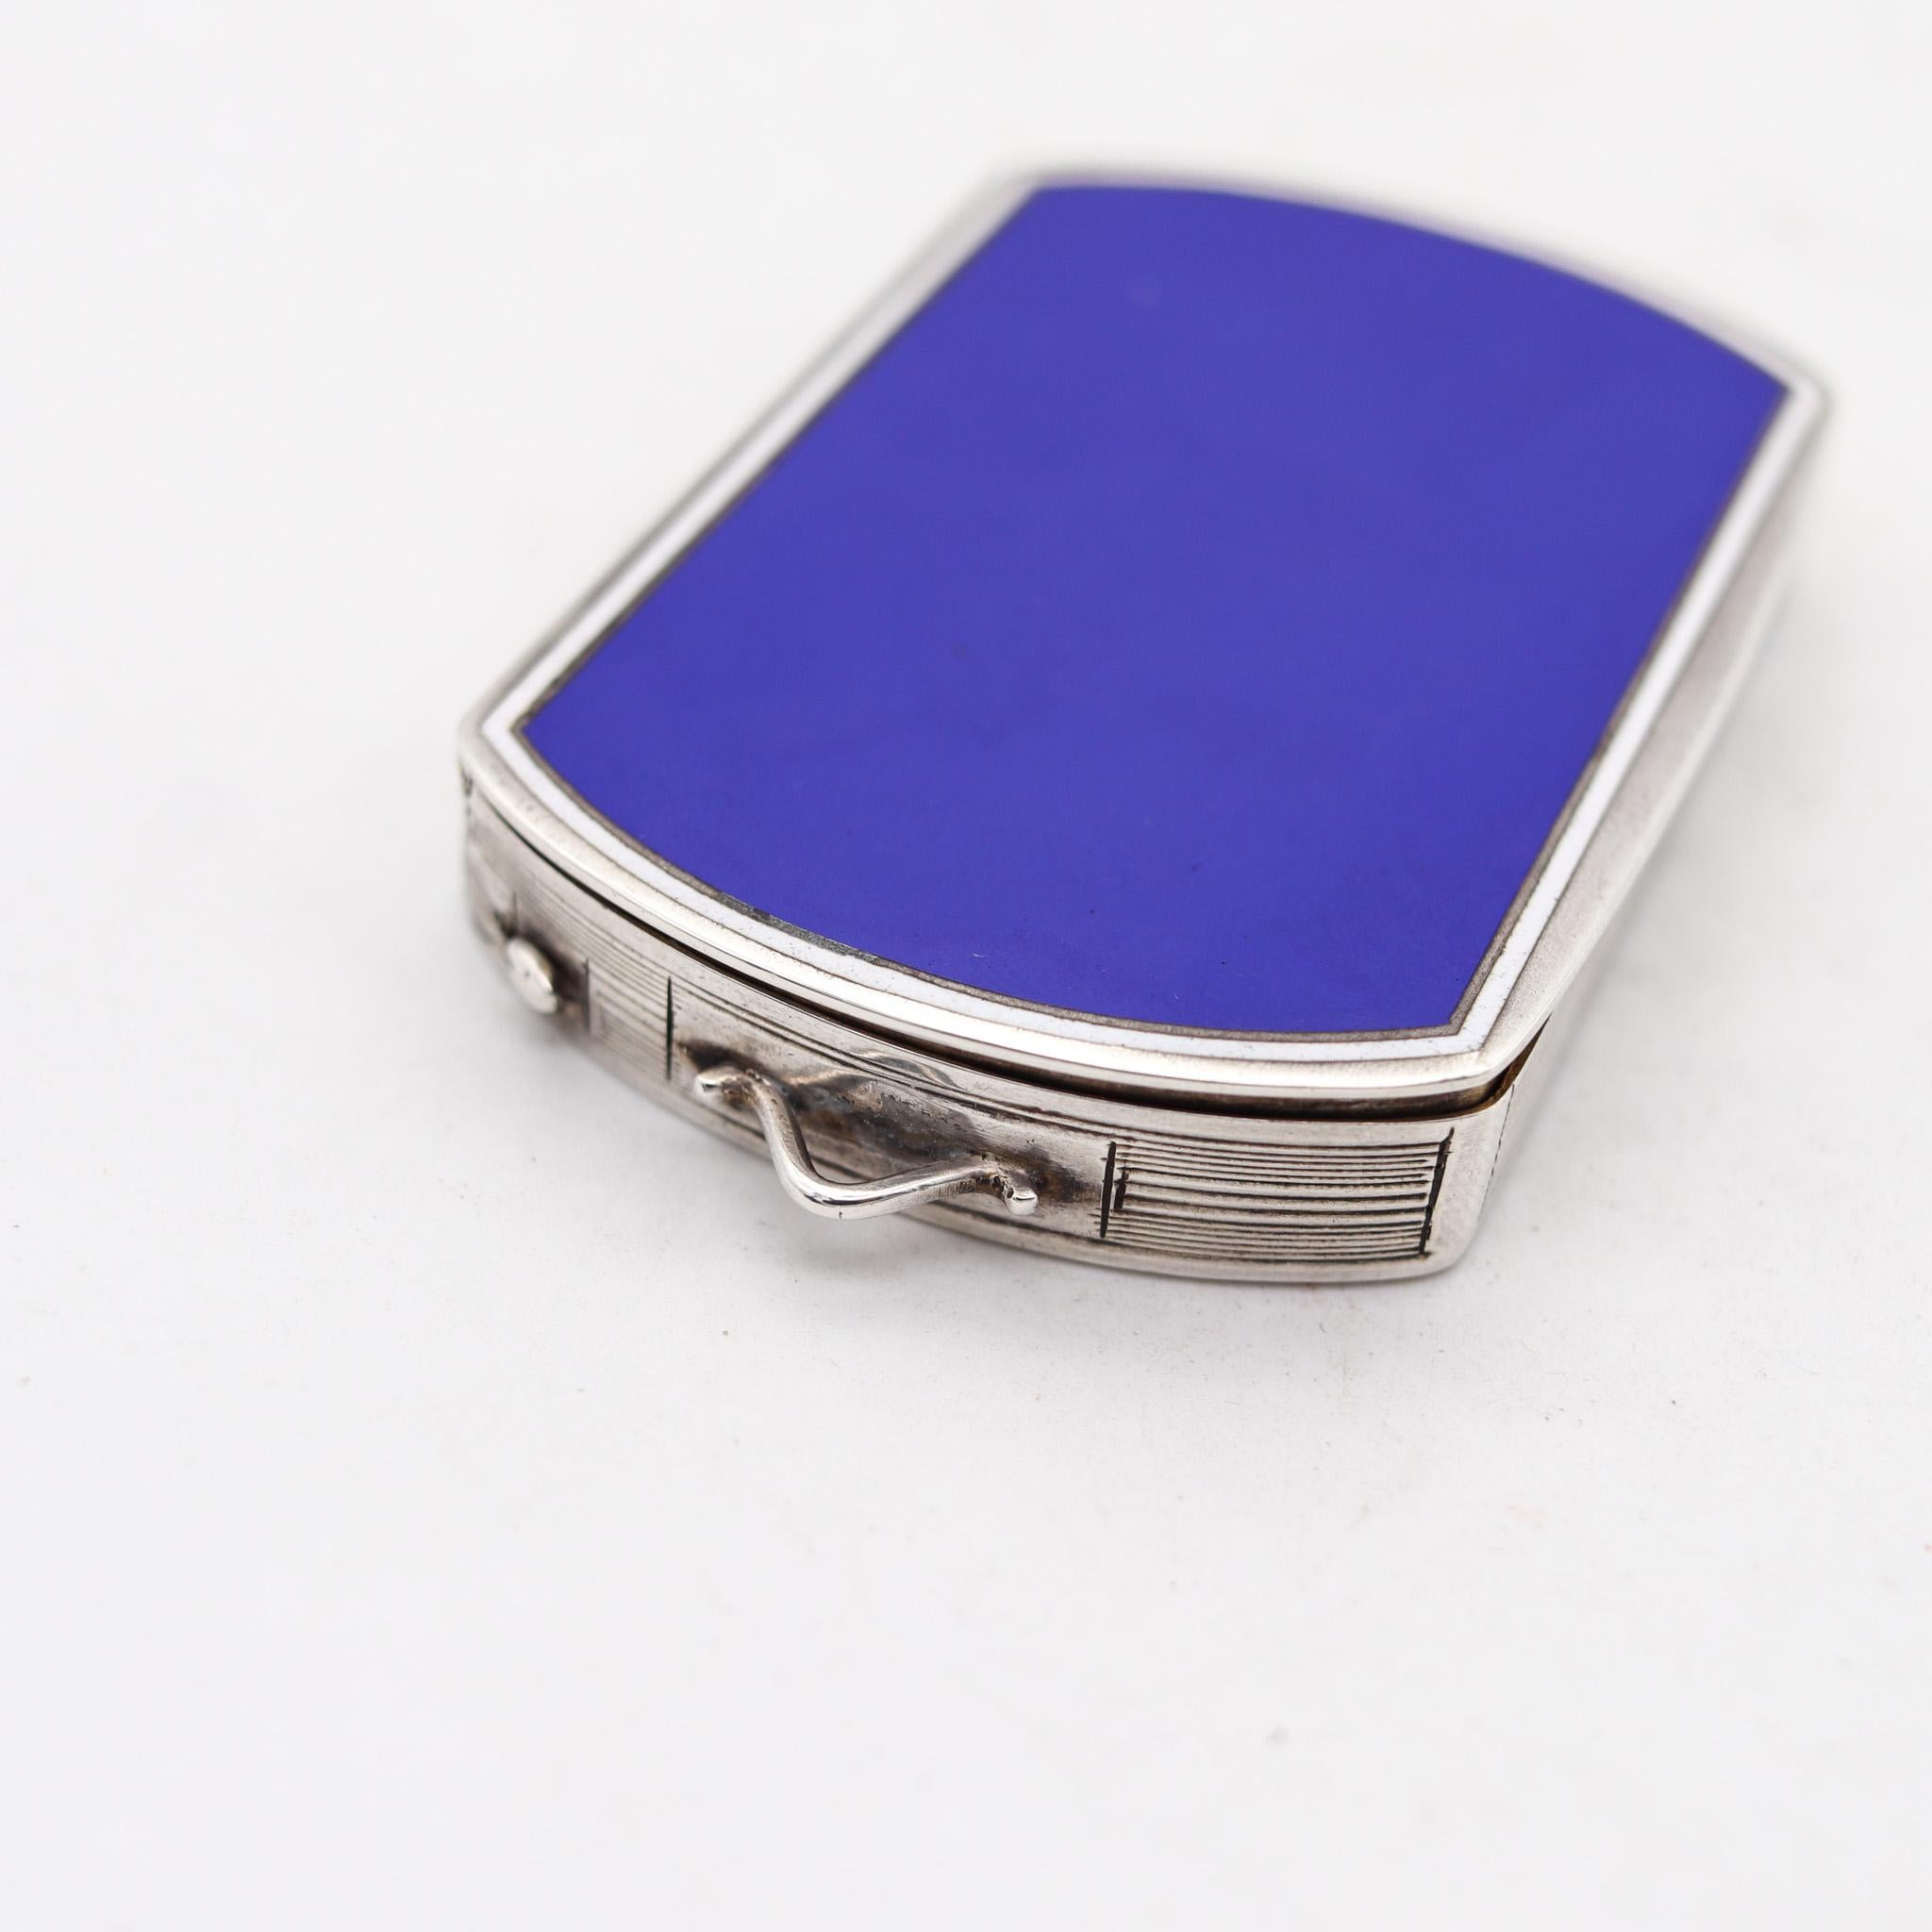 French 1925 Art Deco Enameled Mechanical Compact Pendant Box In Sterling Silver For Sale 3